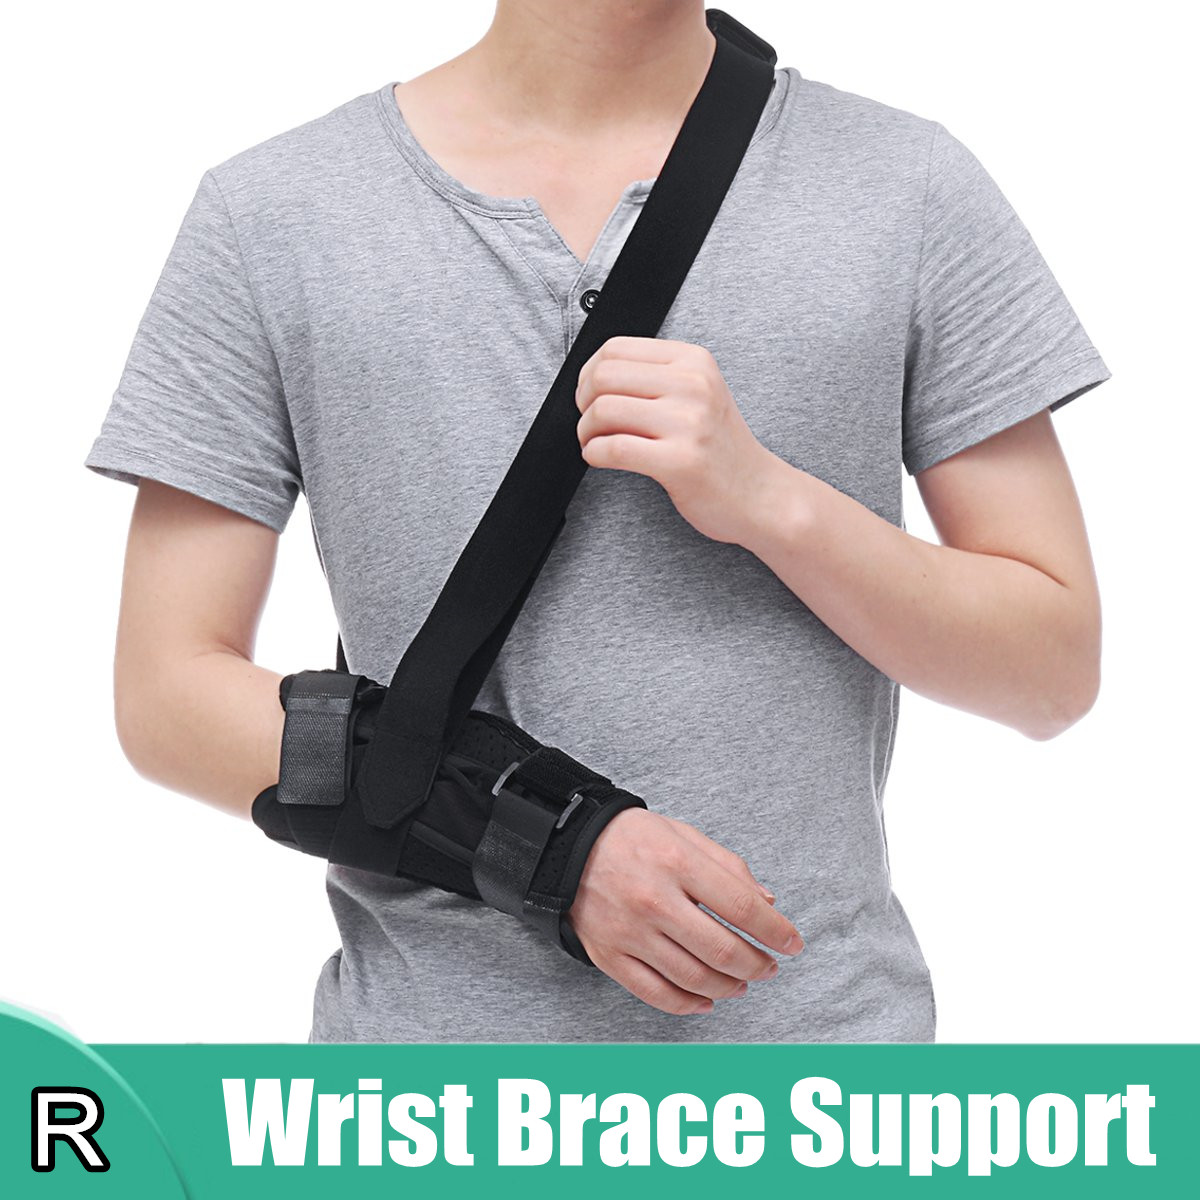 Breathable-Adjustable-Wrist-Support-Wrist-Brace-Wrist-Joint-Fixation-Sprain-Protector-Medical-Protec-1571406-1